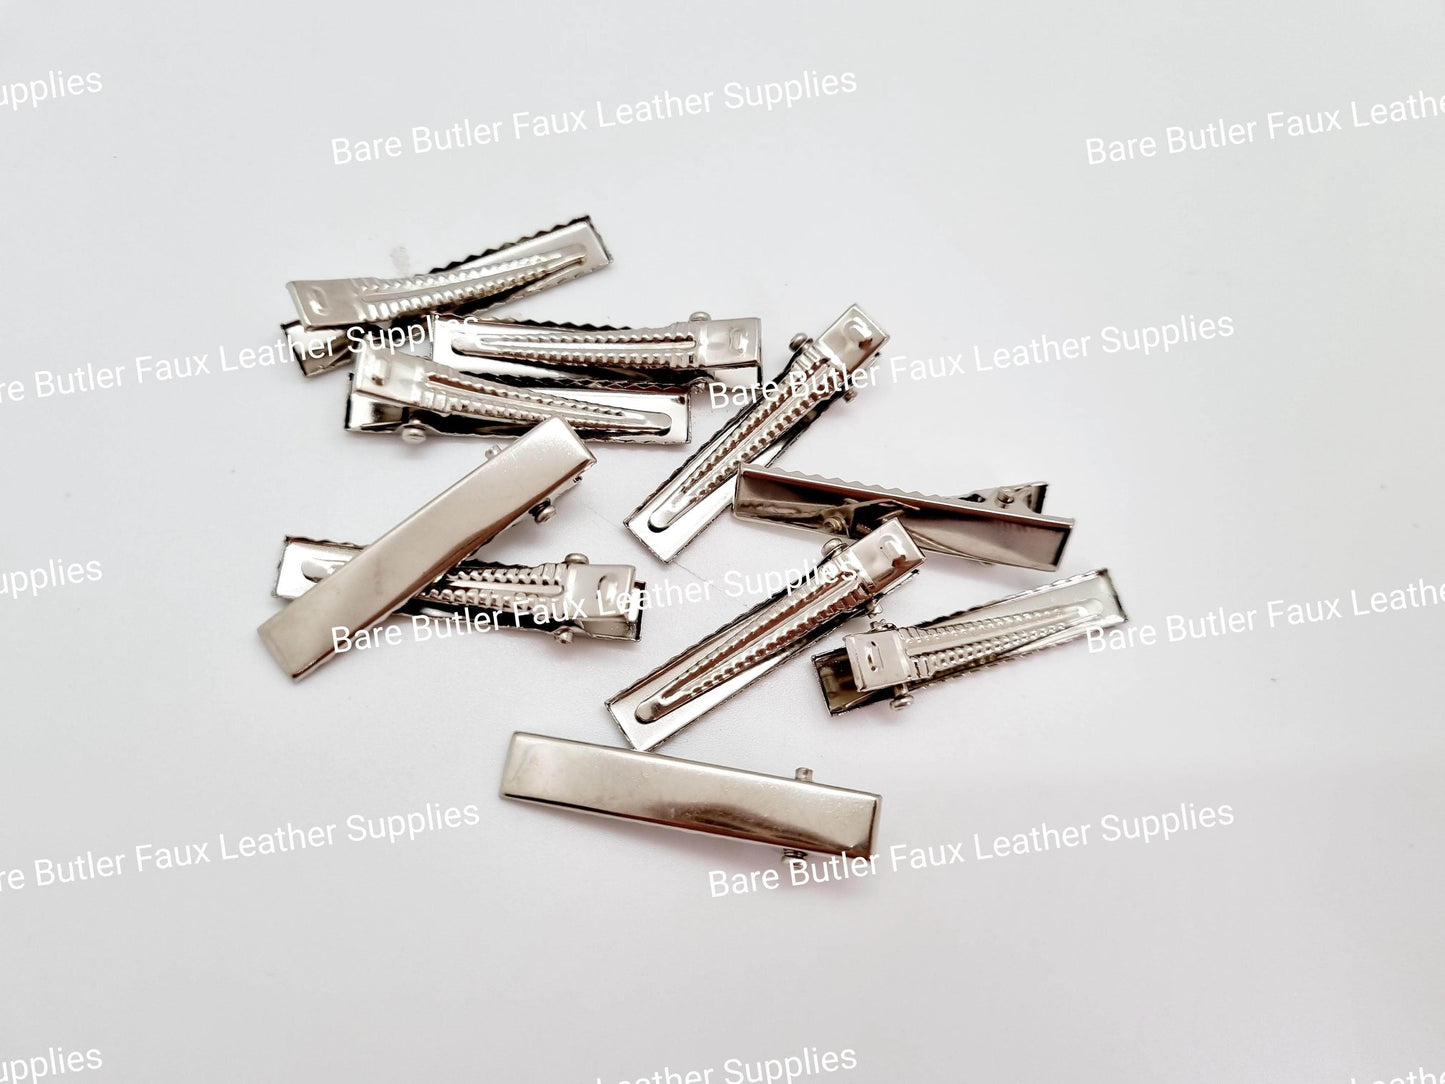 Alligator Clips 35 mm - Pack of 10 - Accessories, Alligator, Clip, Hair, Hair clips - Bare Butler Faux Leather Supplies 